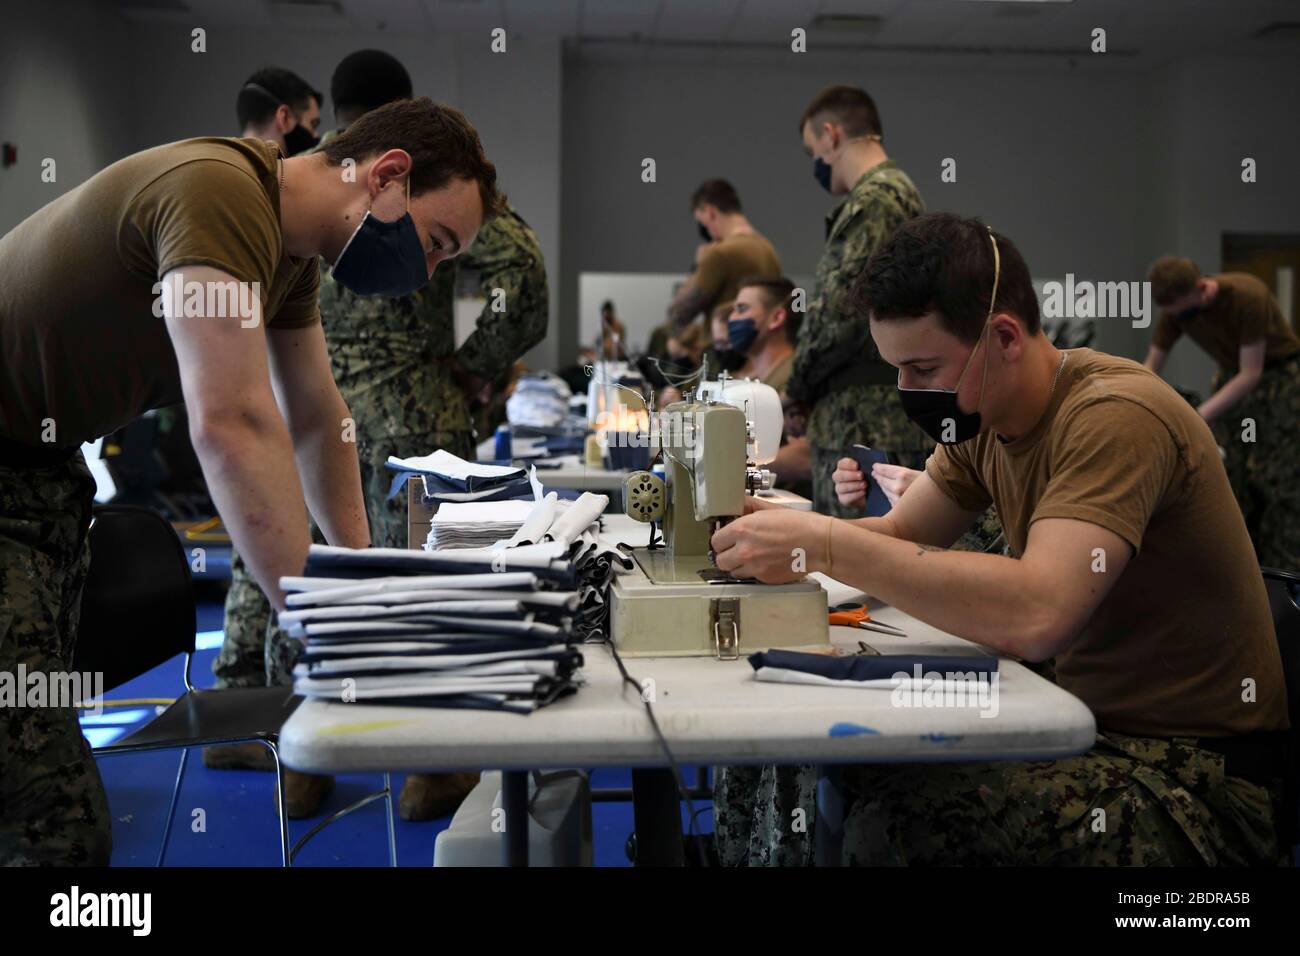 U.S. Navy sailors sew fabric for cloth masks at the Naval Nuclear Power Training Command April 8, 2020 in Goose Creek, South Carolina. Sailors are now required to wear masks when social distancing may not be possible to help mitigate the spread and prevent COVID-19. Stock Photo